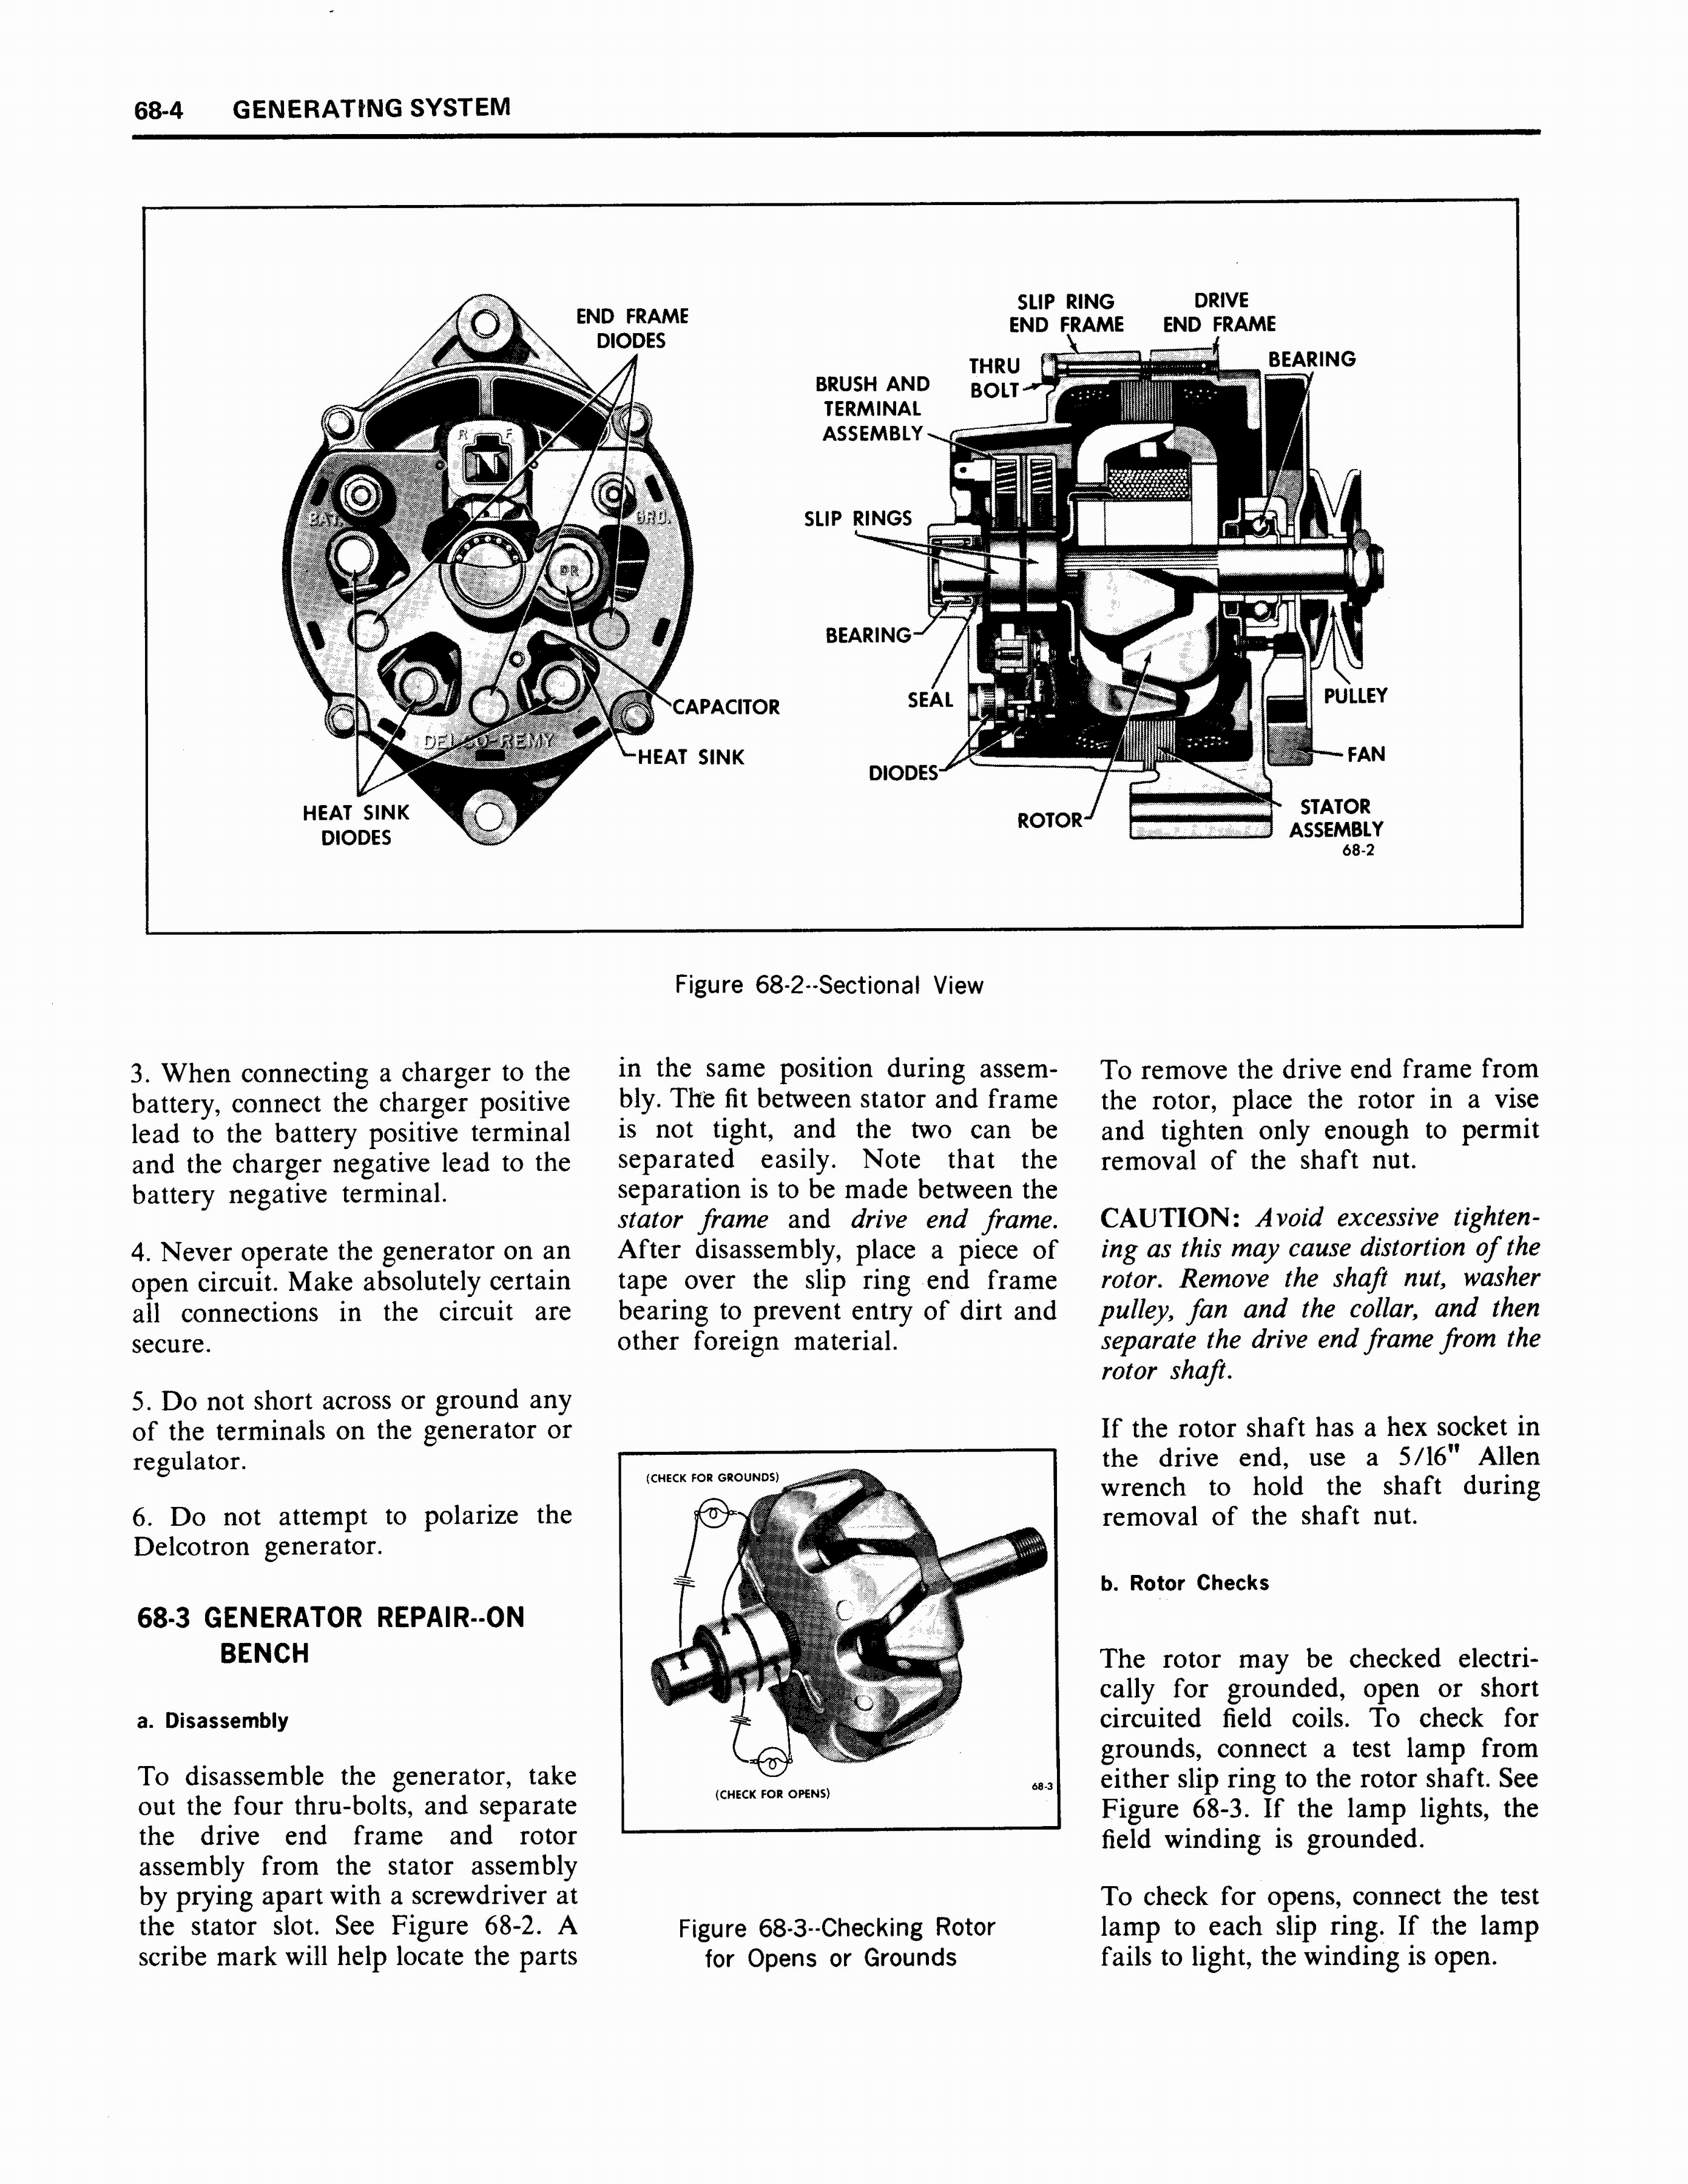 1970 Buick Body Service Manual - Engine Electrical Page 4 of 40